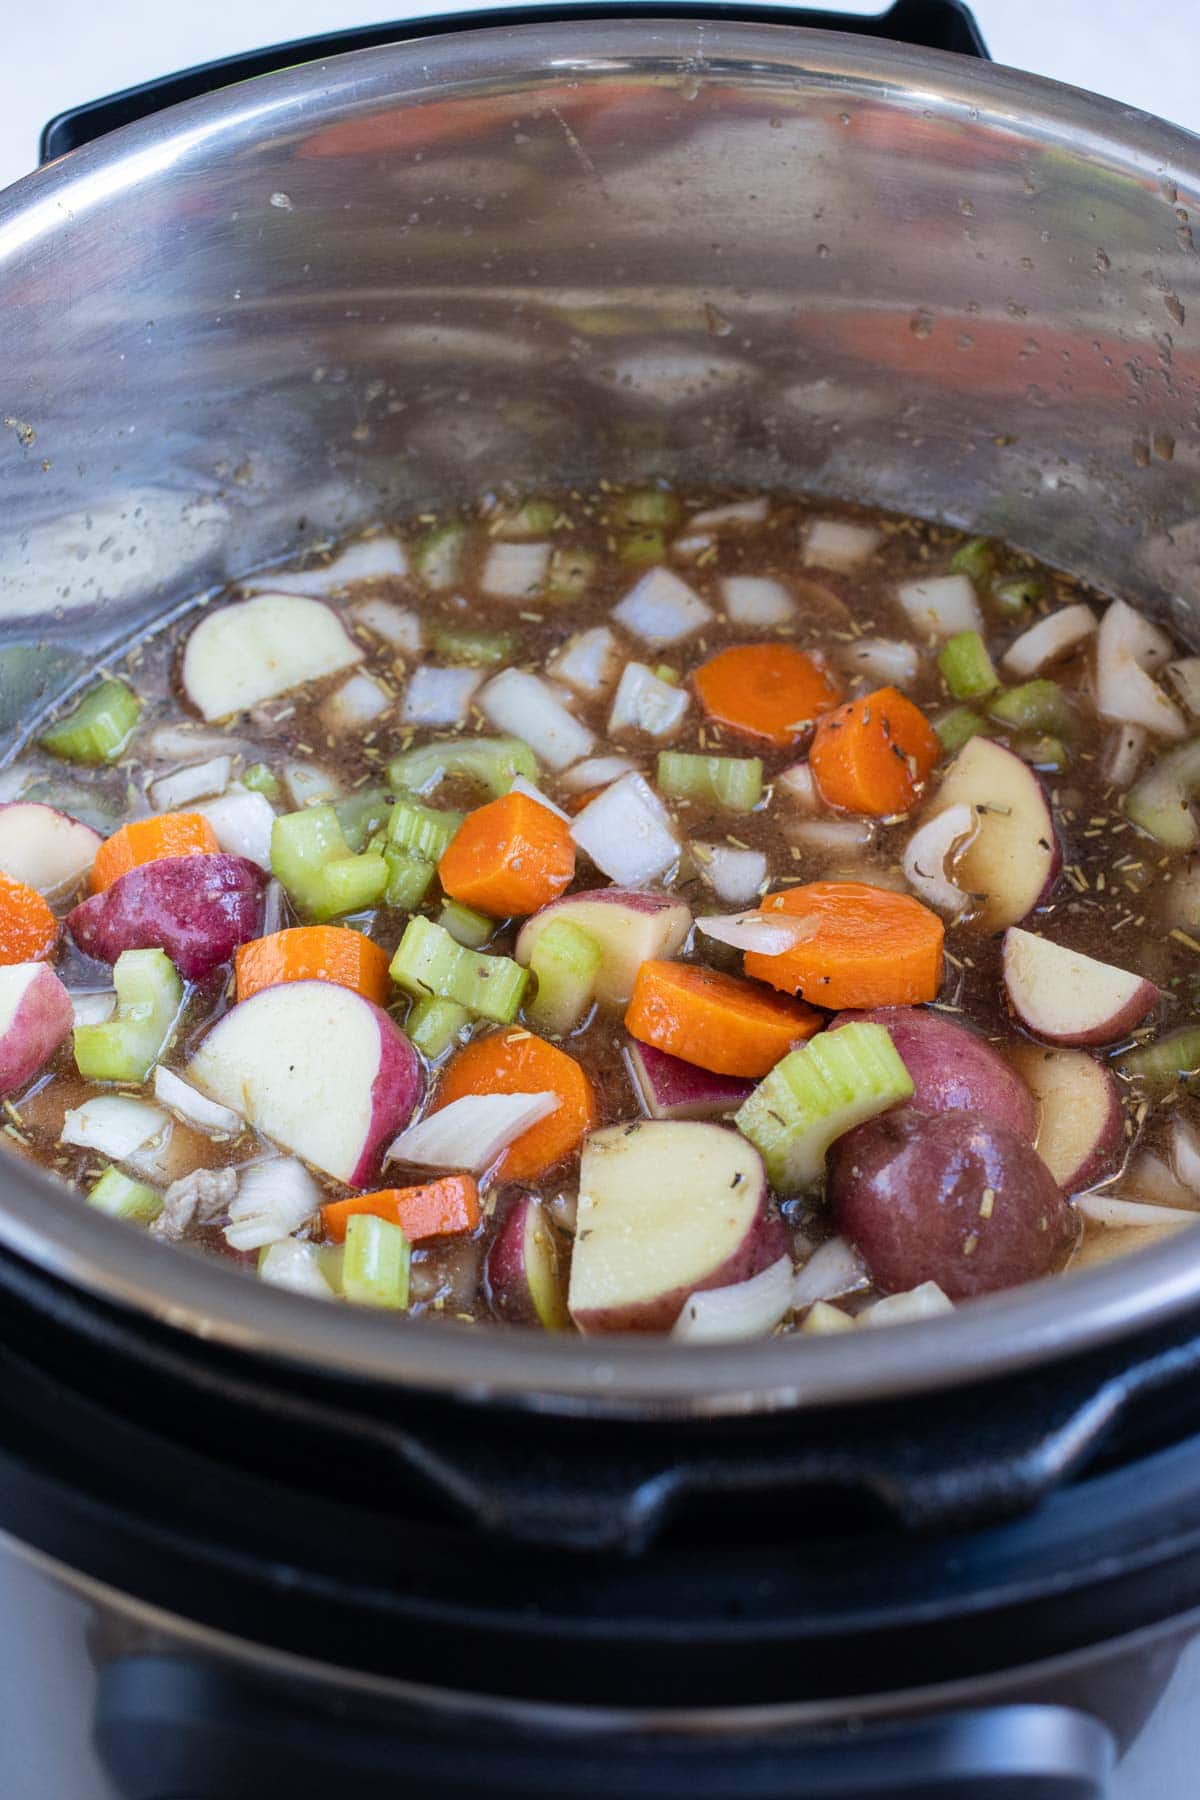 Ingredients are all stirred together and cooked in the instant pot.